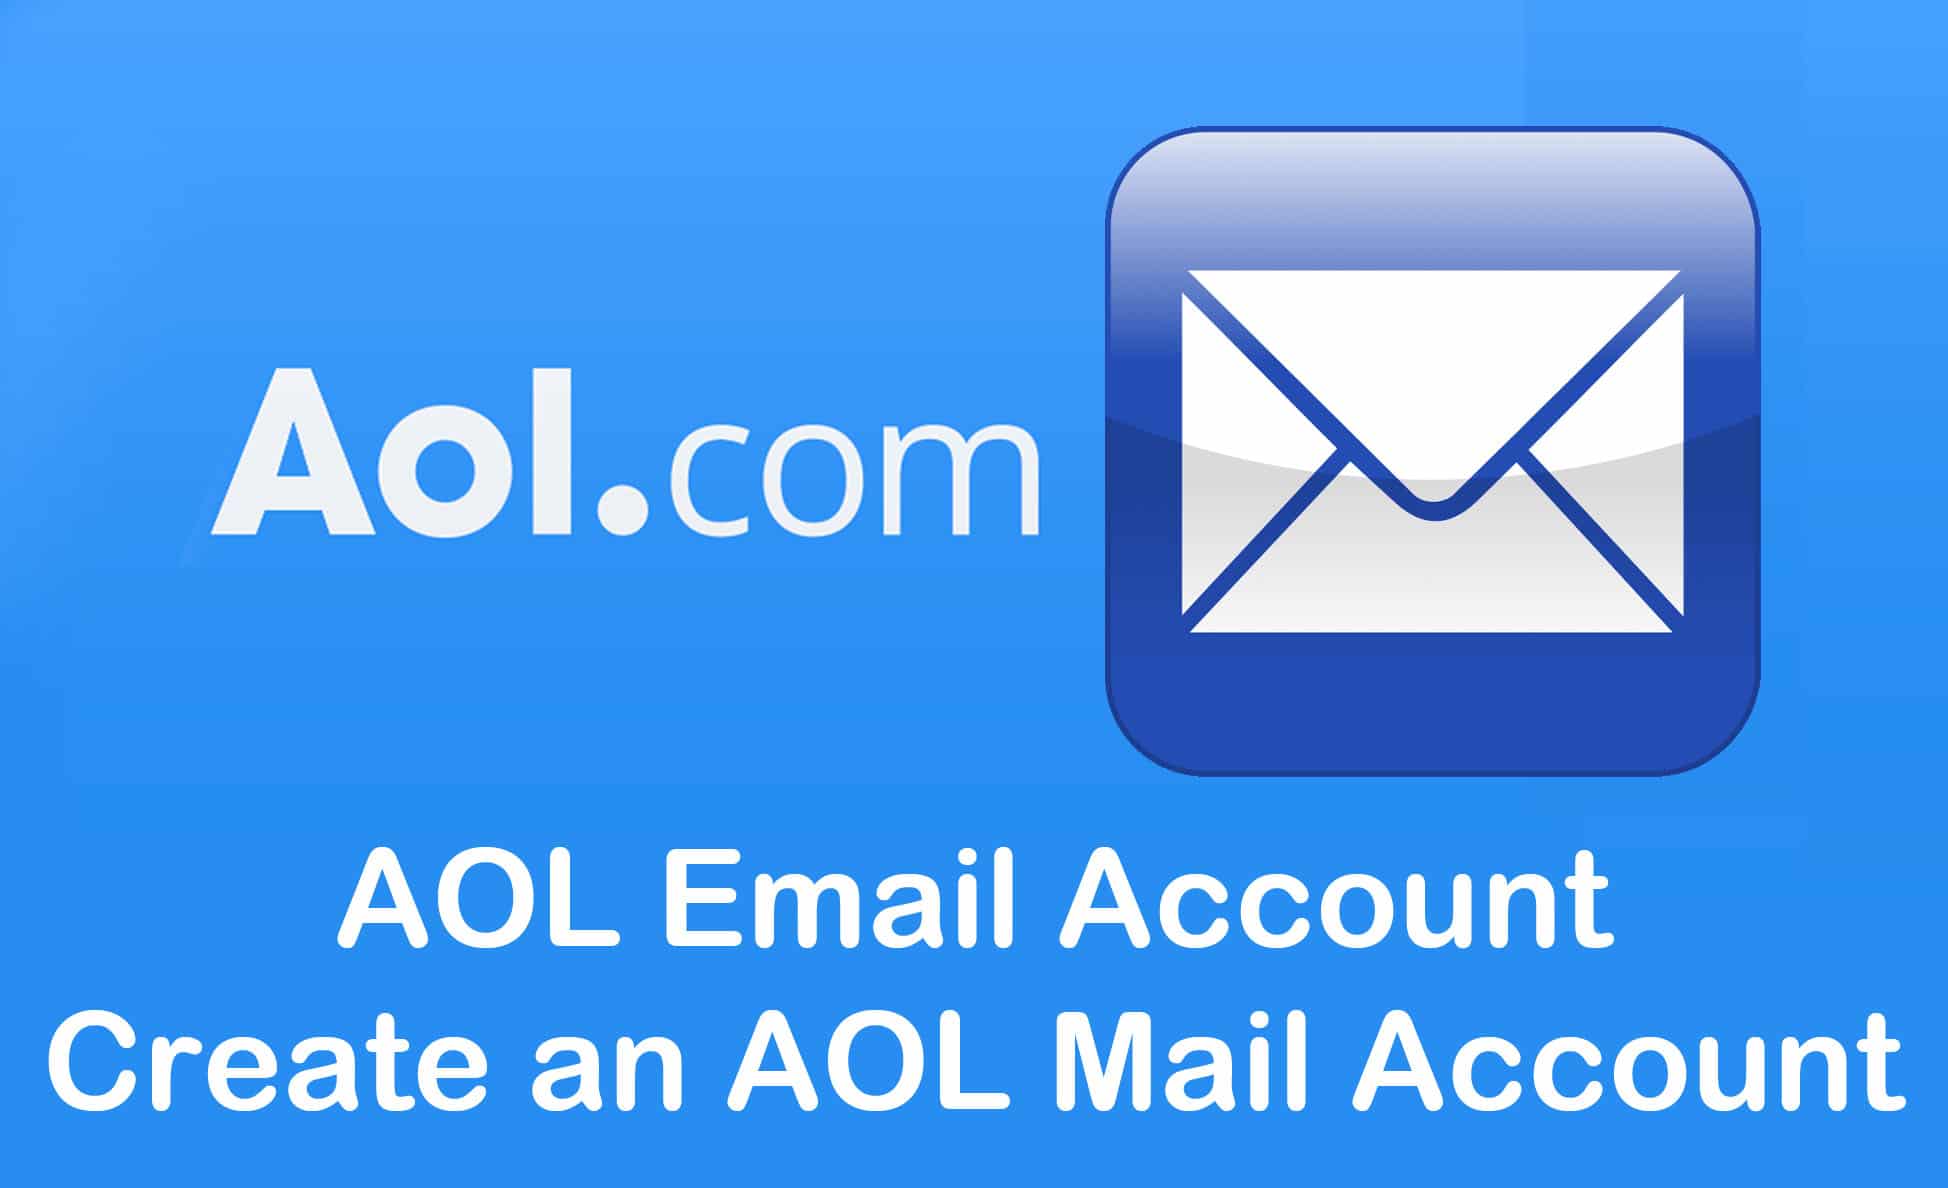 aol gold install download